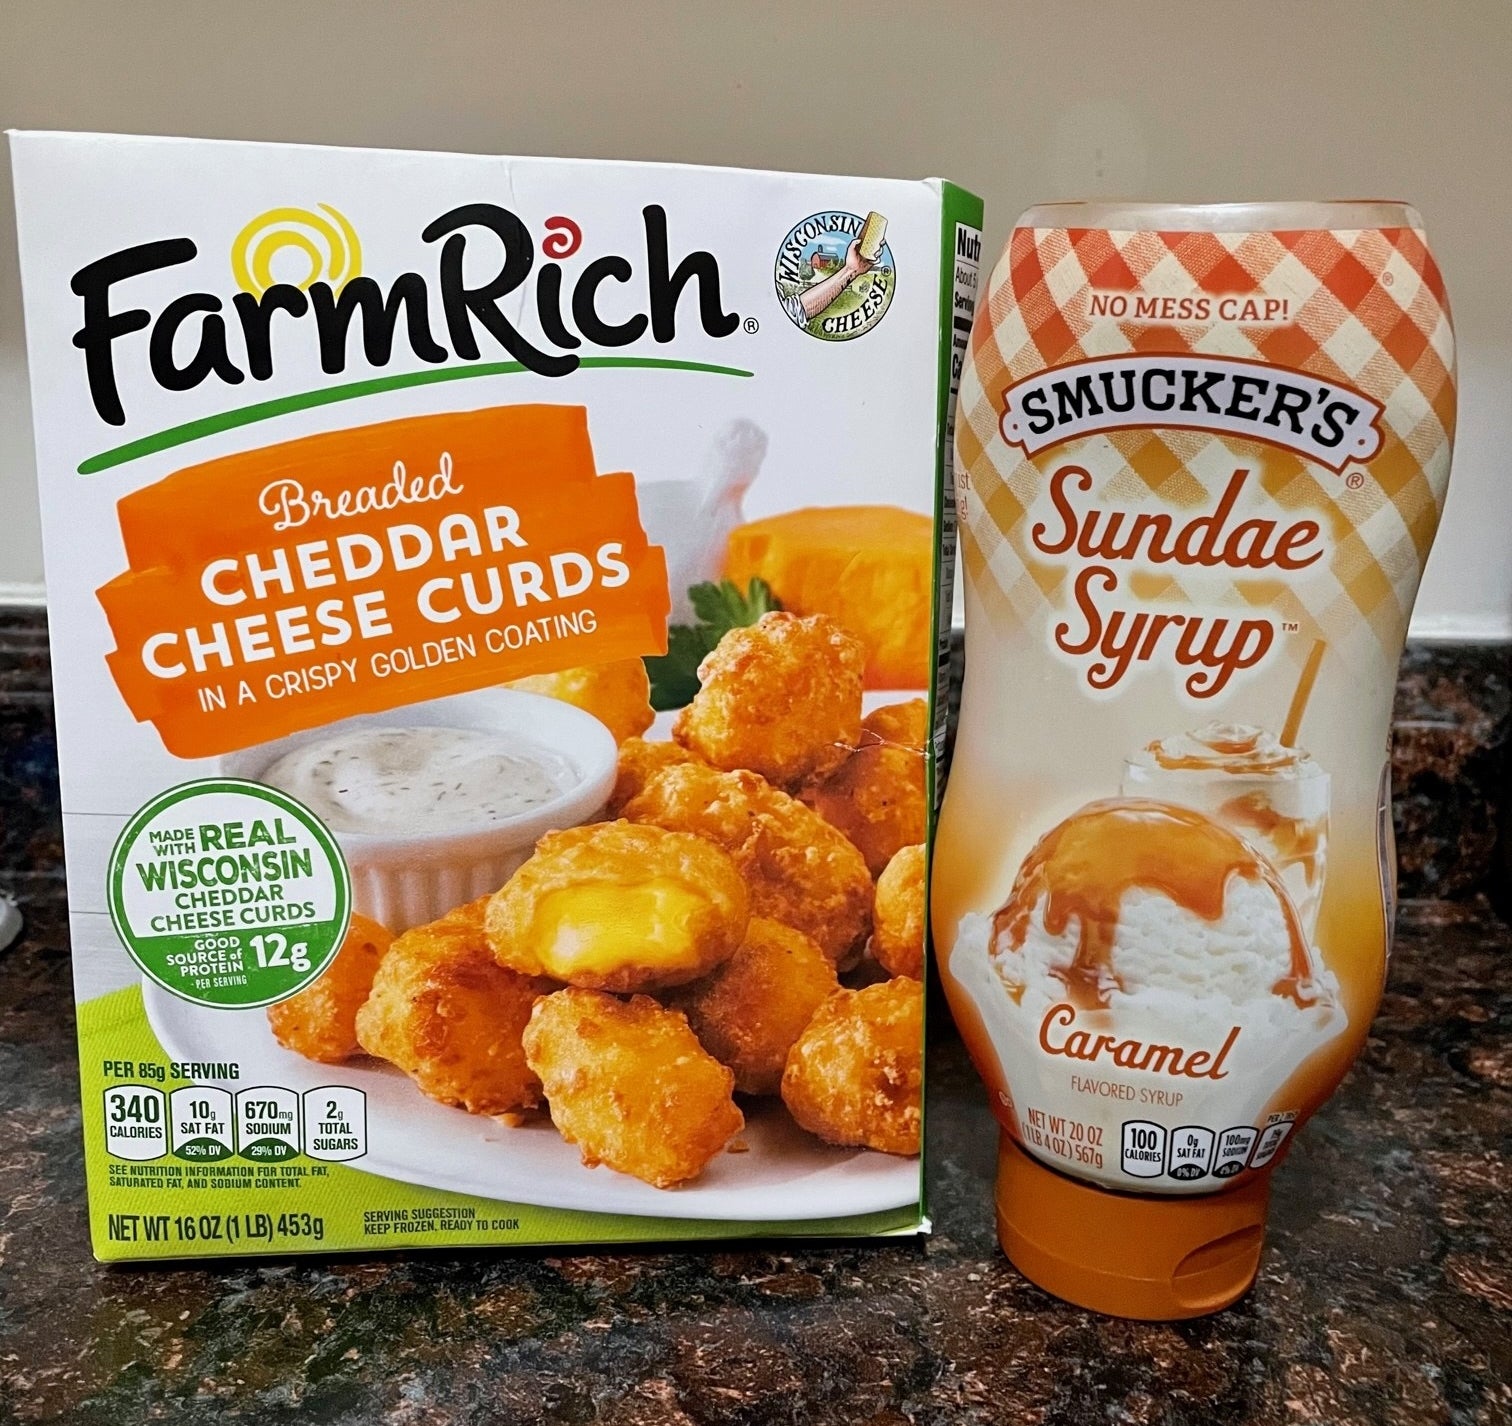 Farm Rich cheese curds and caramel syrup